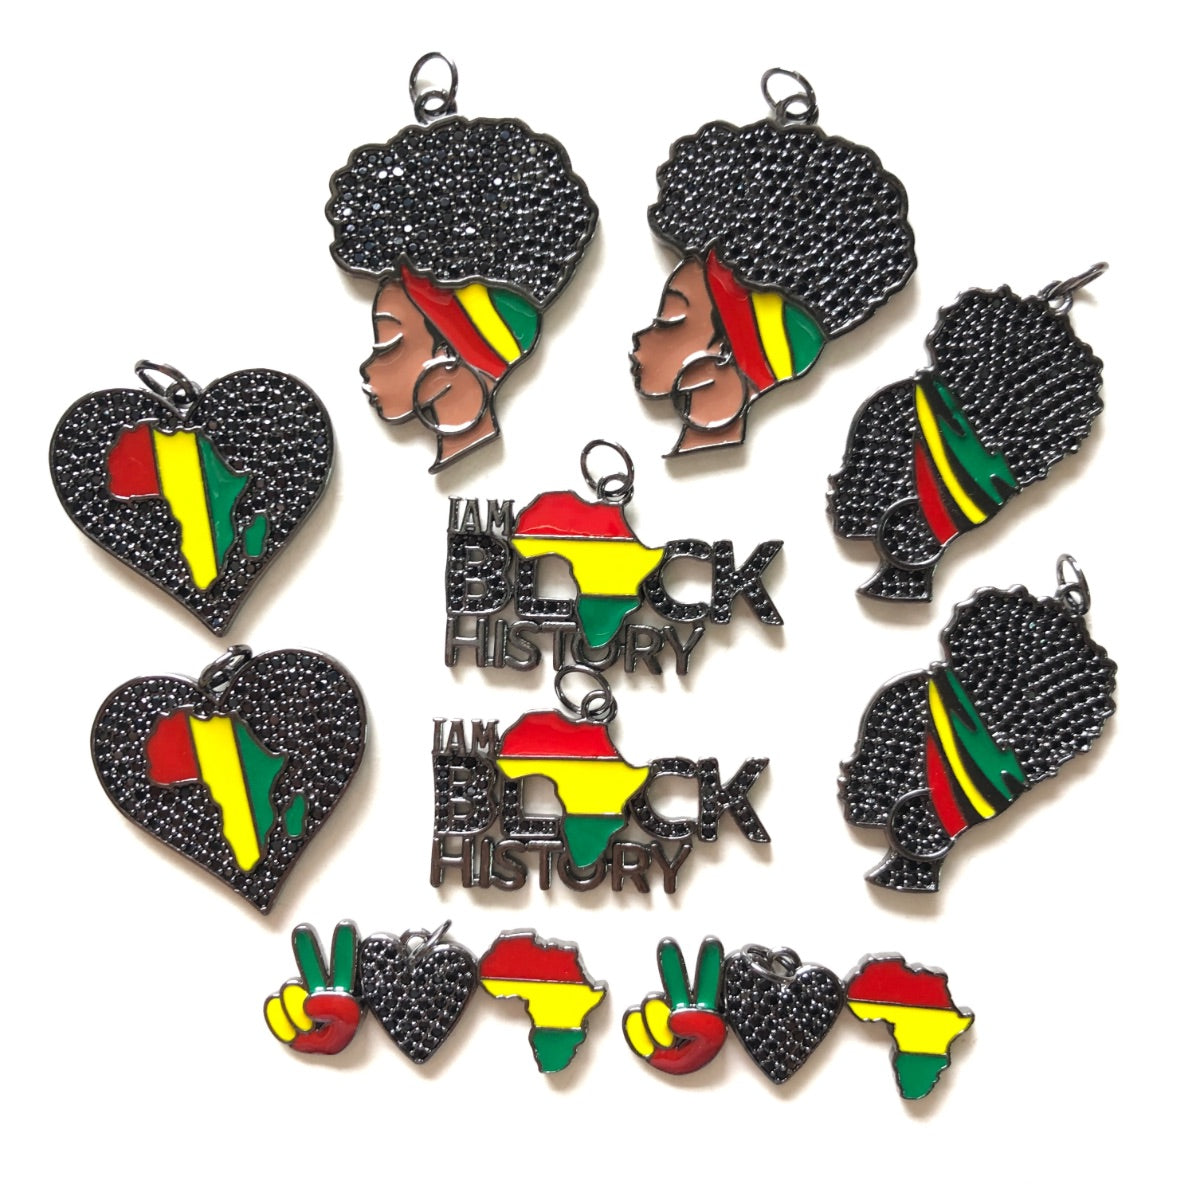 10pcs/lot CZ Pave Charms Bundle for Black History Month Juneteenth Awareness Black CZ Paved Charms Juneteenth & Black History Month Awareness Mix Charms New Charms Arrivals Charms Beads Beyond